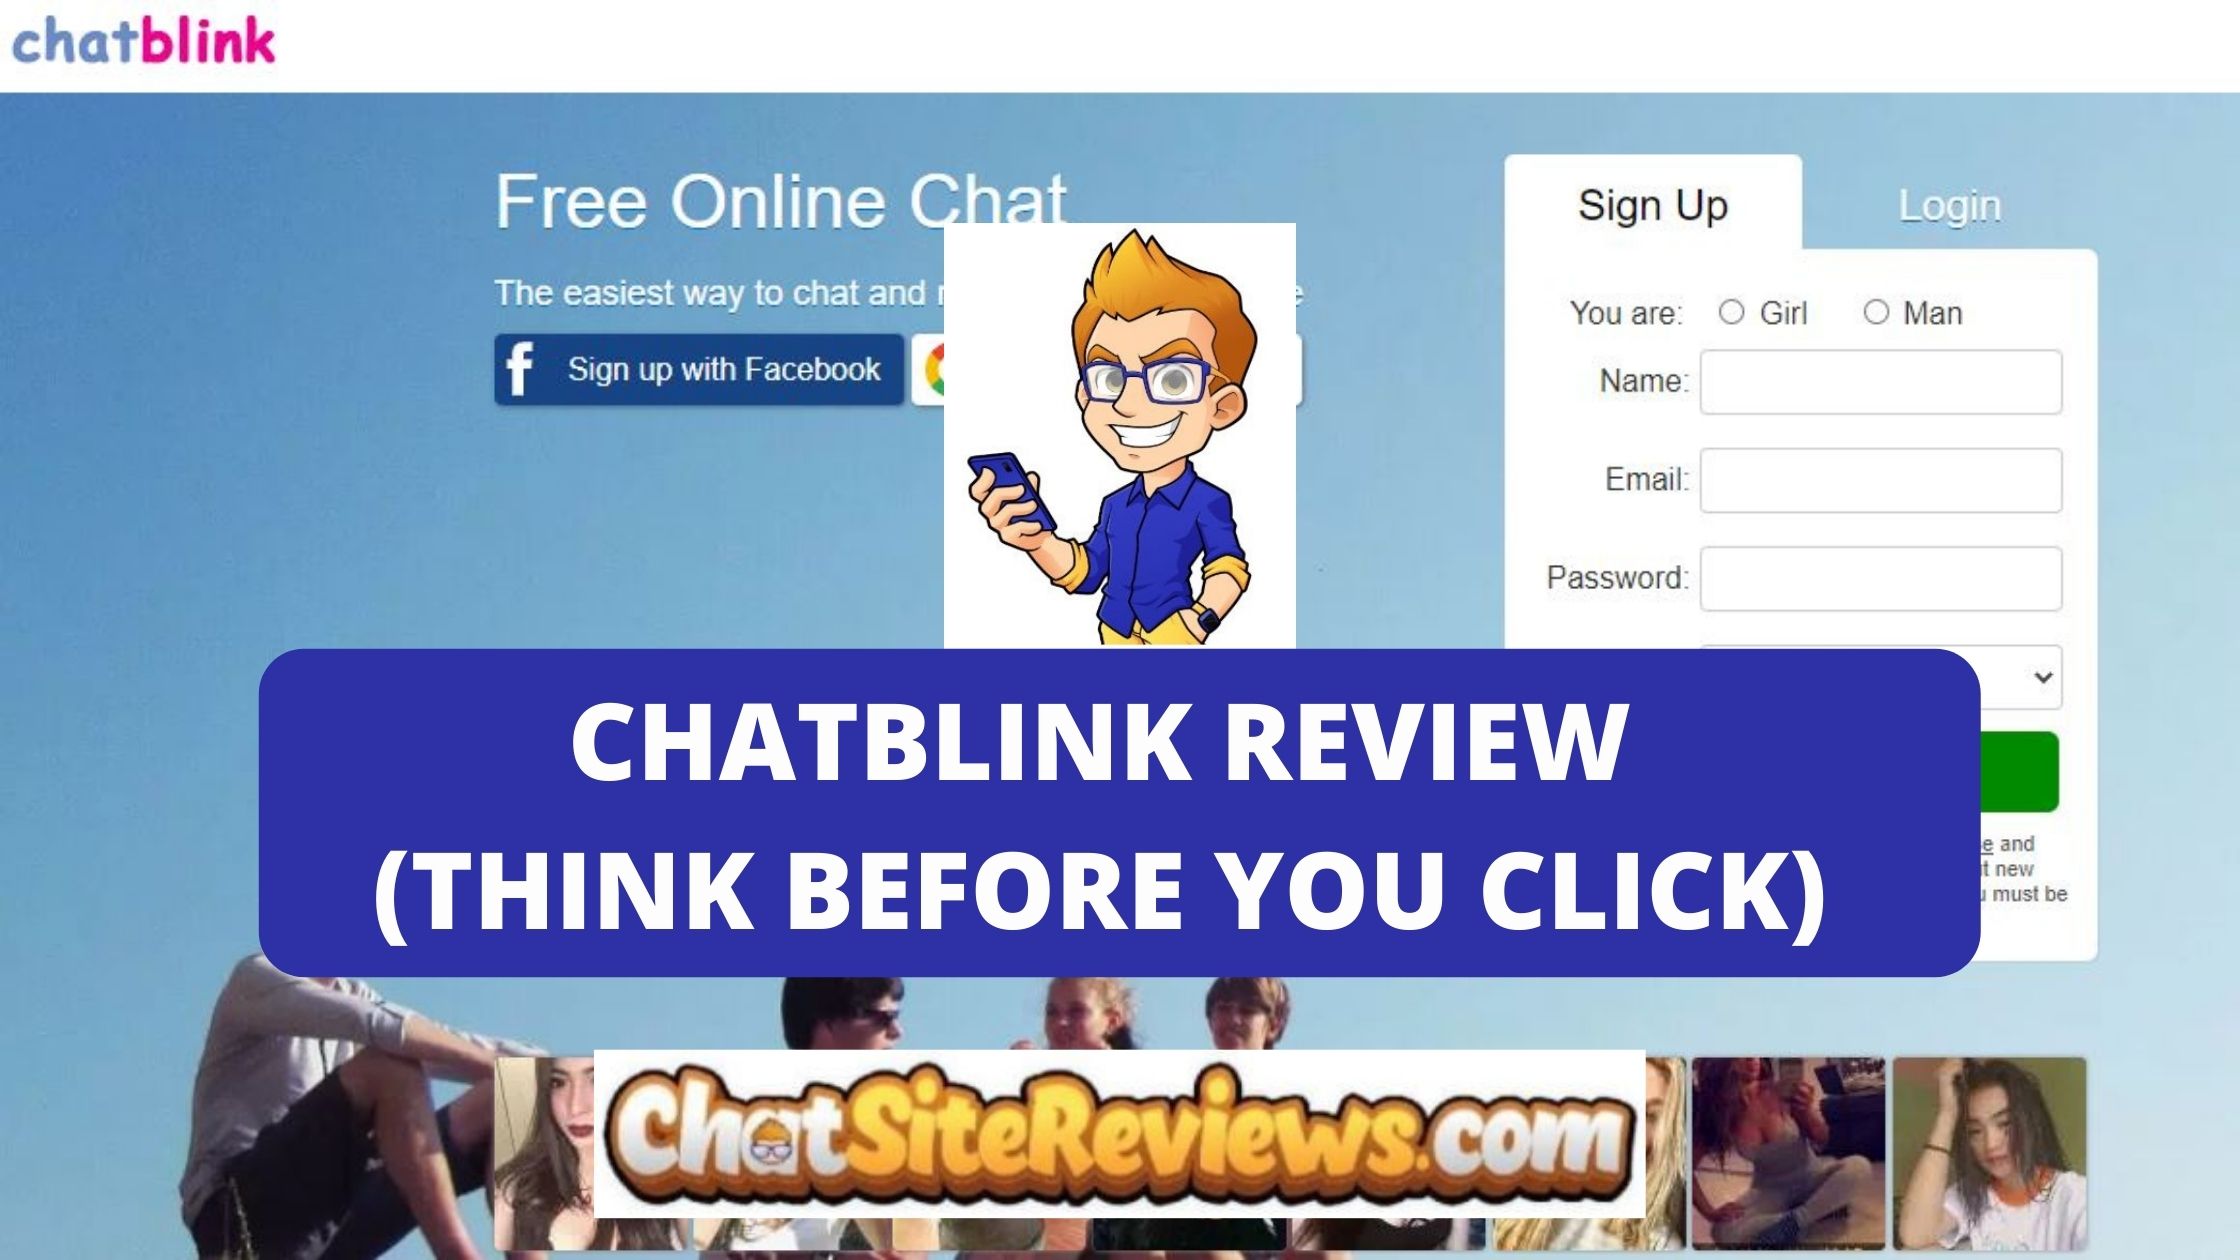 Chatblink Review (Think Before You Click) Chat Site Reviews picture pic